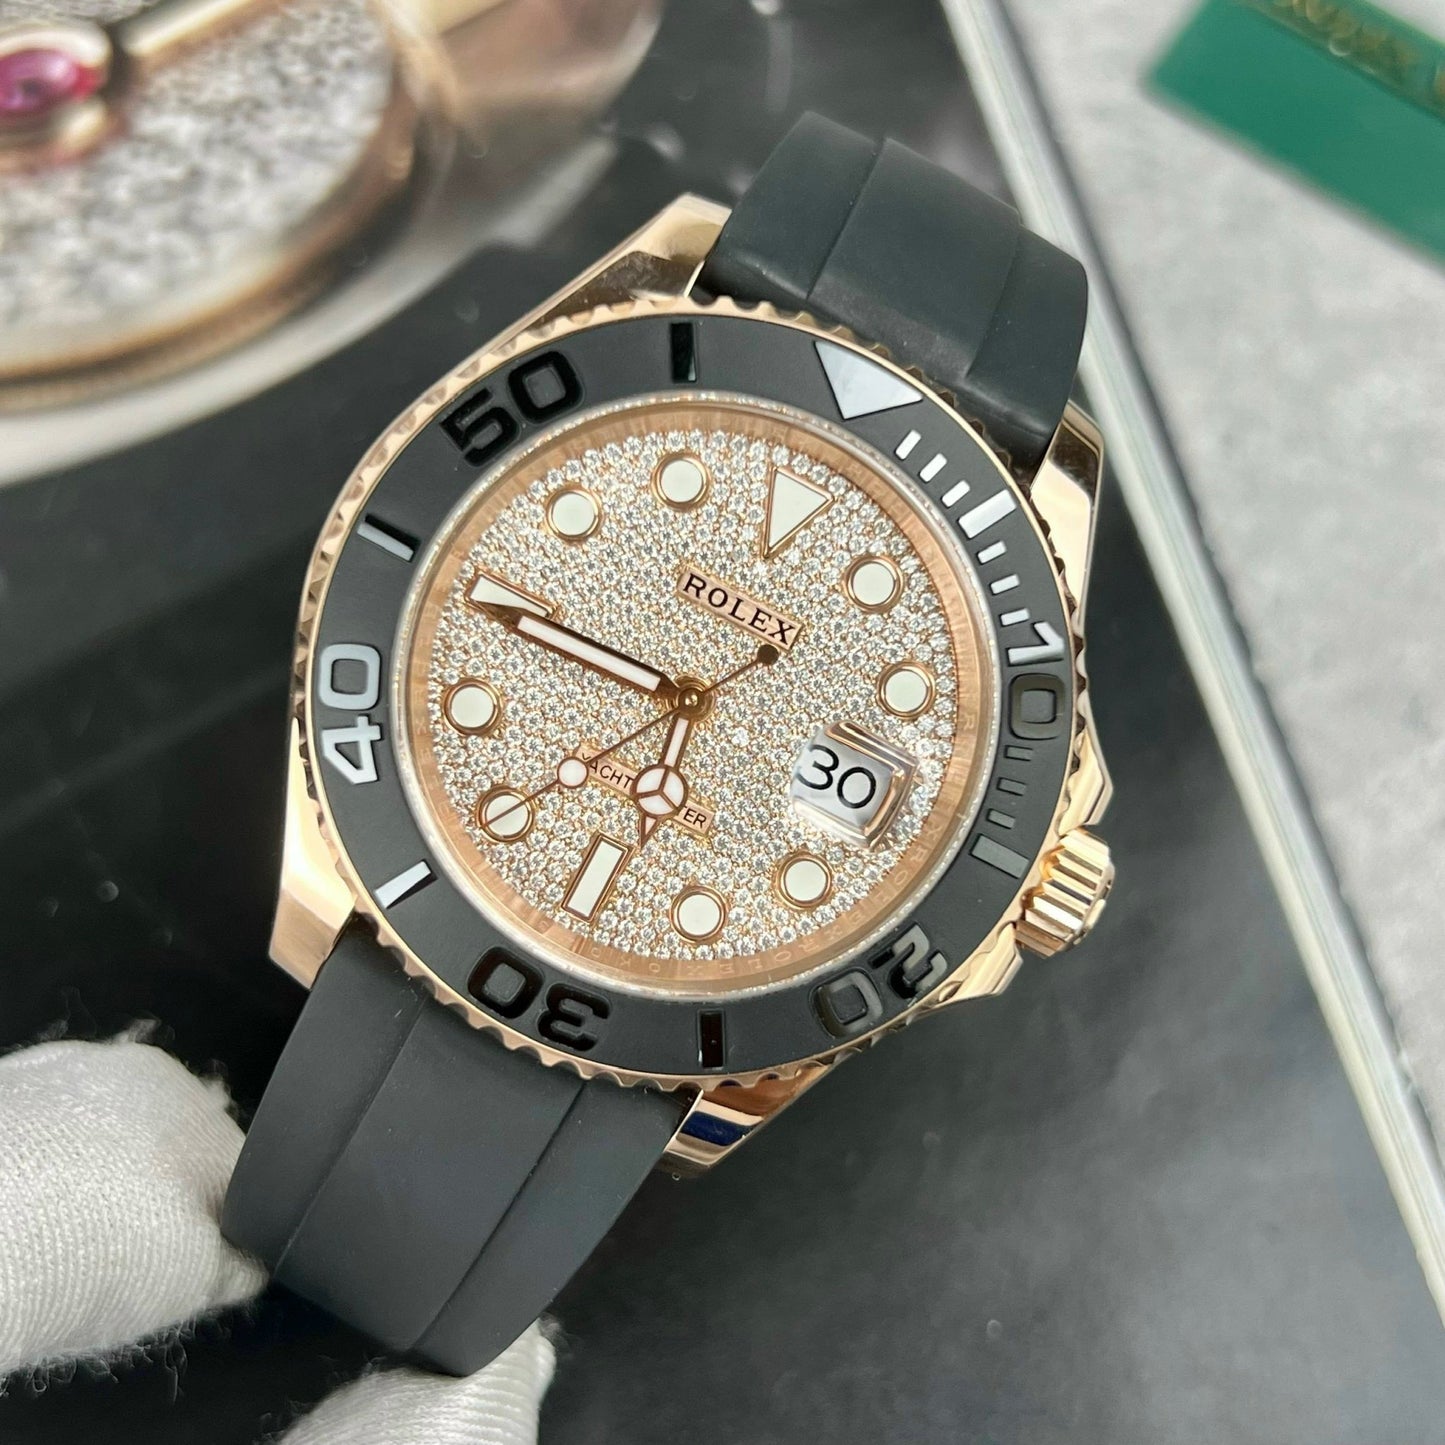 Rolex Yacht-Master 40 126655 Pave stone dial - 3235 Movement coated 18k gold and moissanite